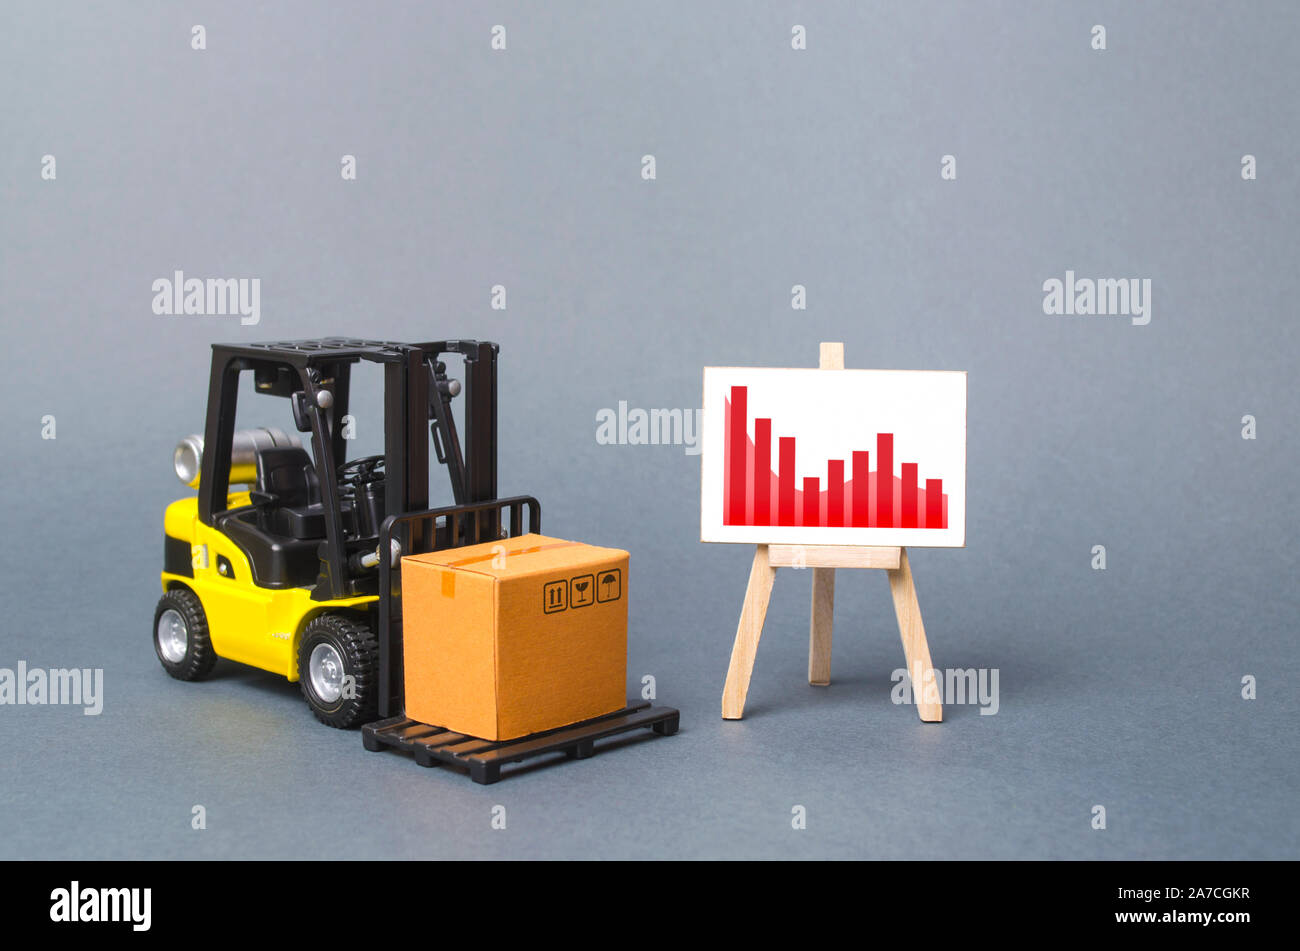 Forklift truck carries a cardboard box near a stand with a Negative red trend chart. decline in the production of goods and products, the economic dow Stock Photo